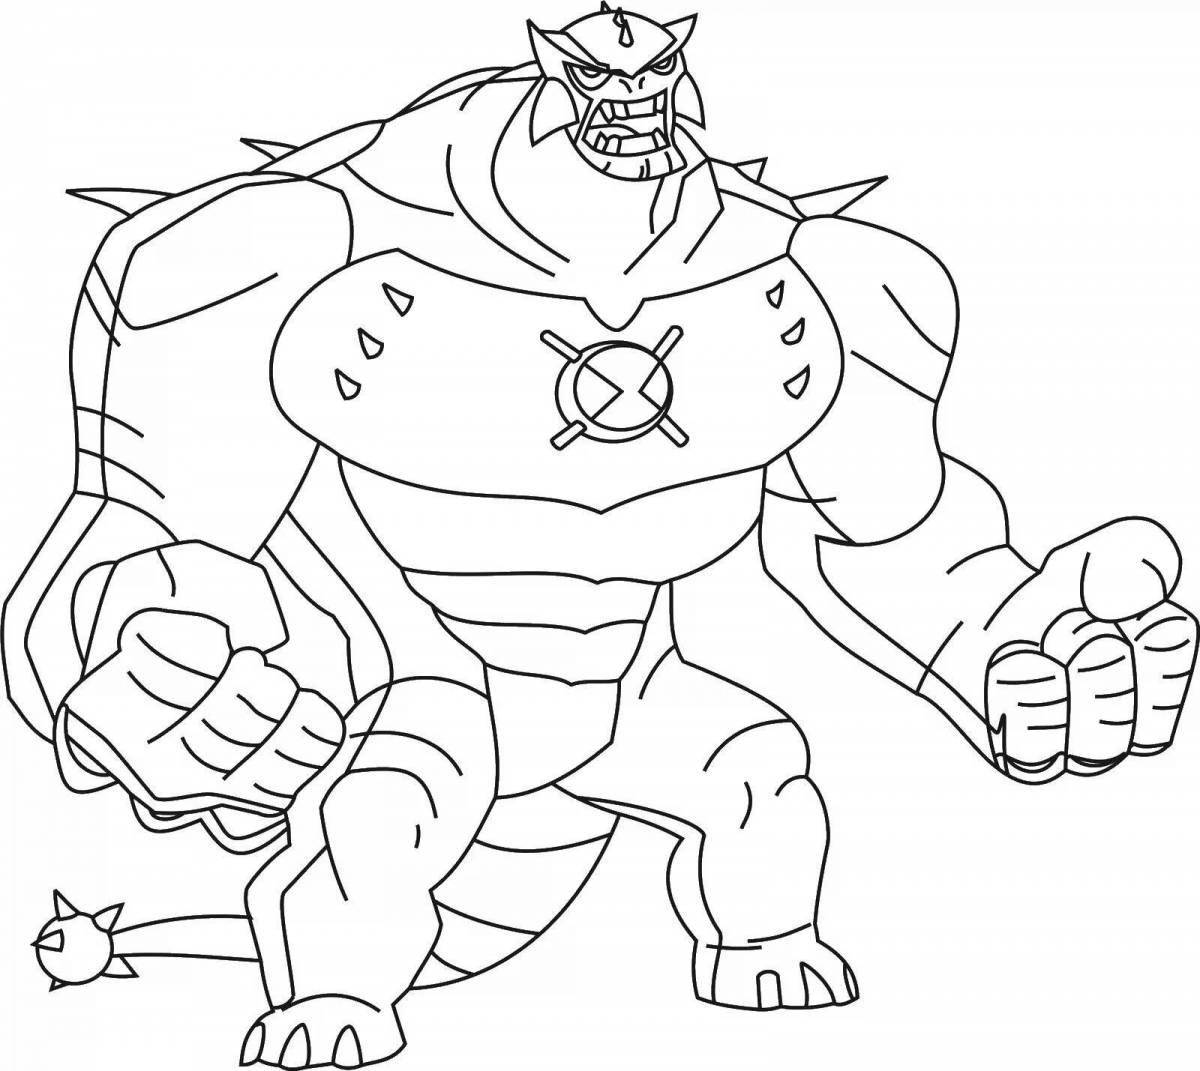 Animated nubooster coloring page